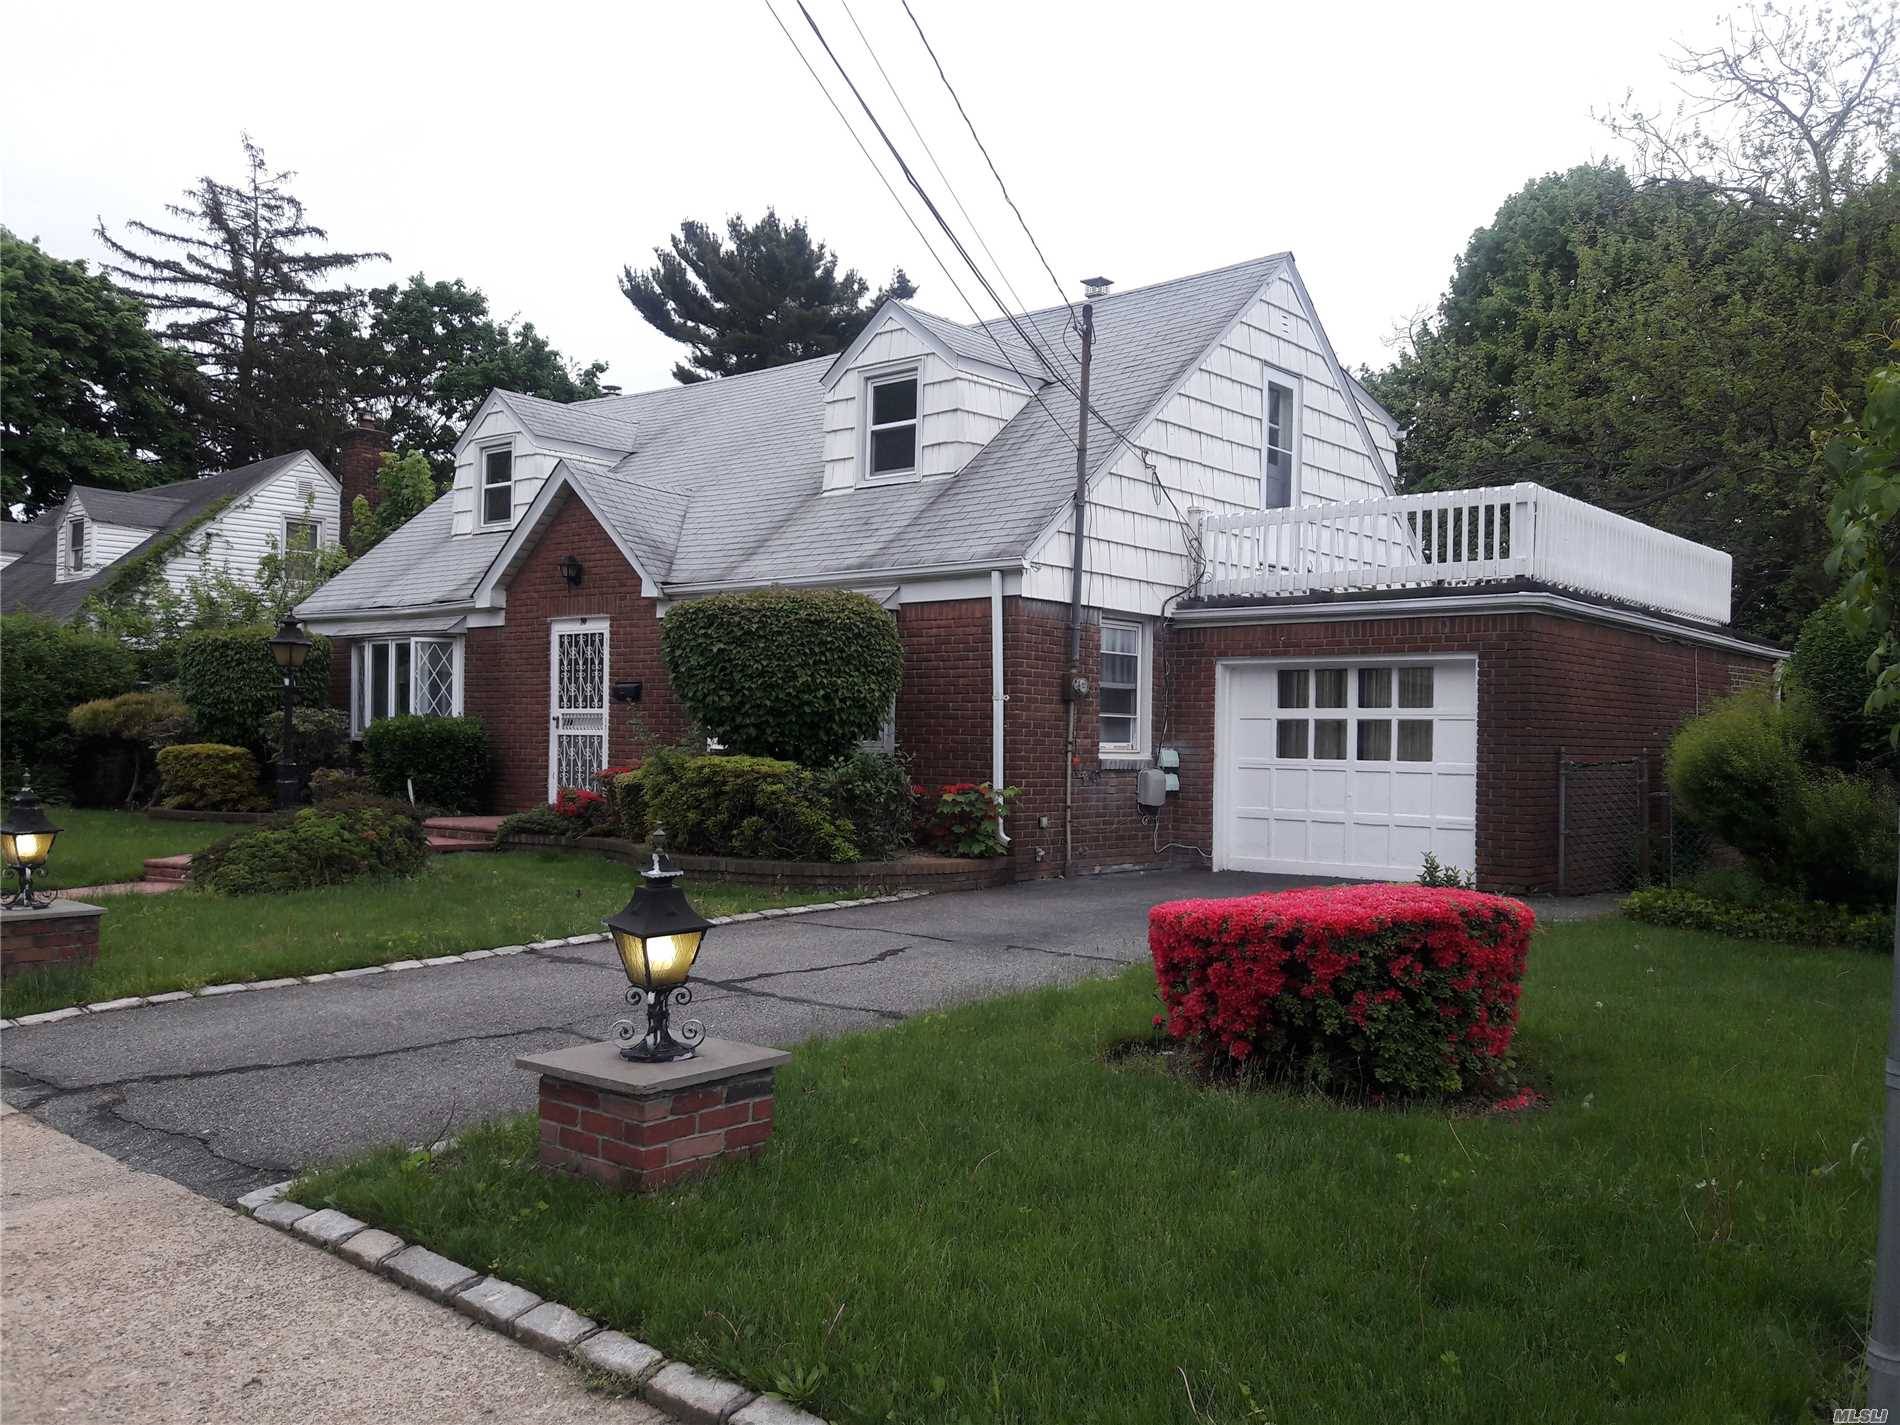 Huge 6Br 3Fbh Cape On Huge Park Like Back Yard 1/2 Mile From Molloy Collage.